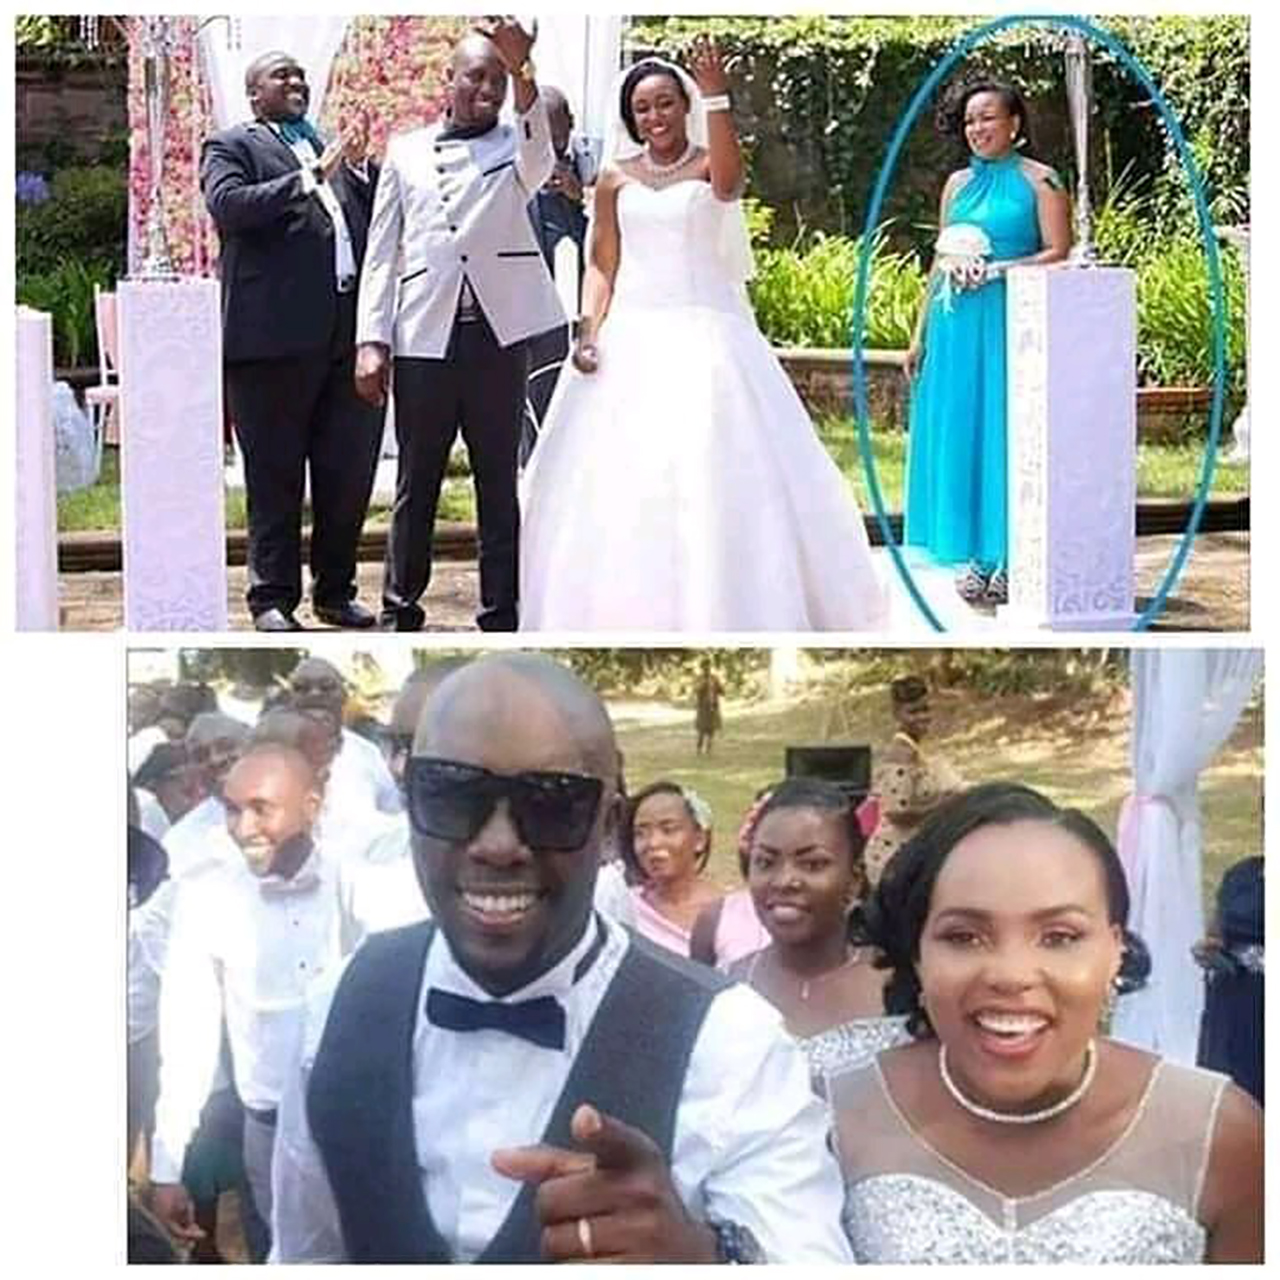 In 2015 she attended her best friend's wedding, 2019 she married the same man who dumped her friend 1